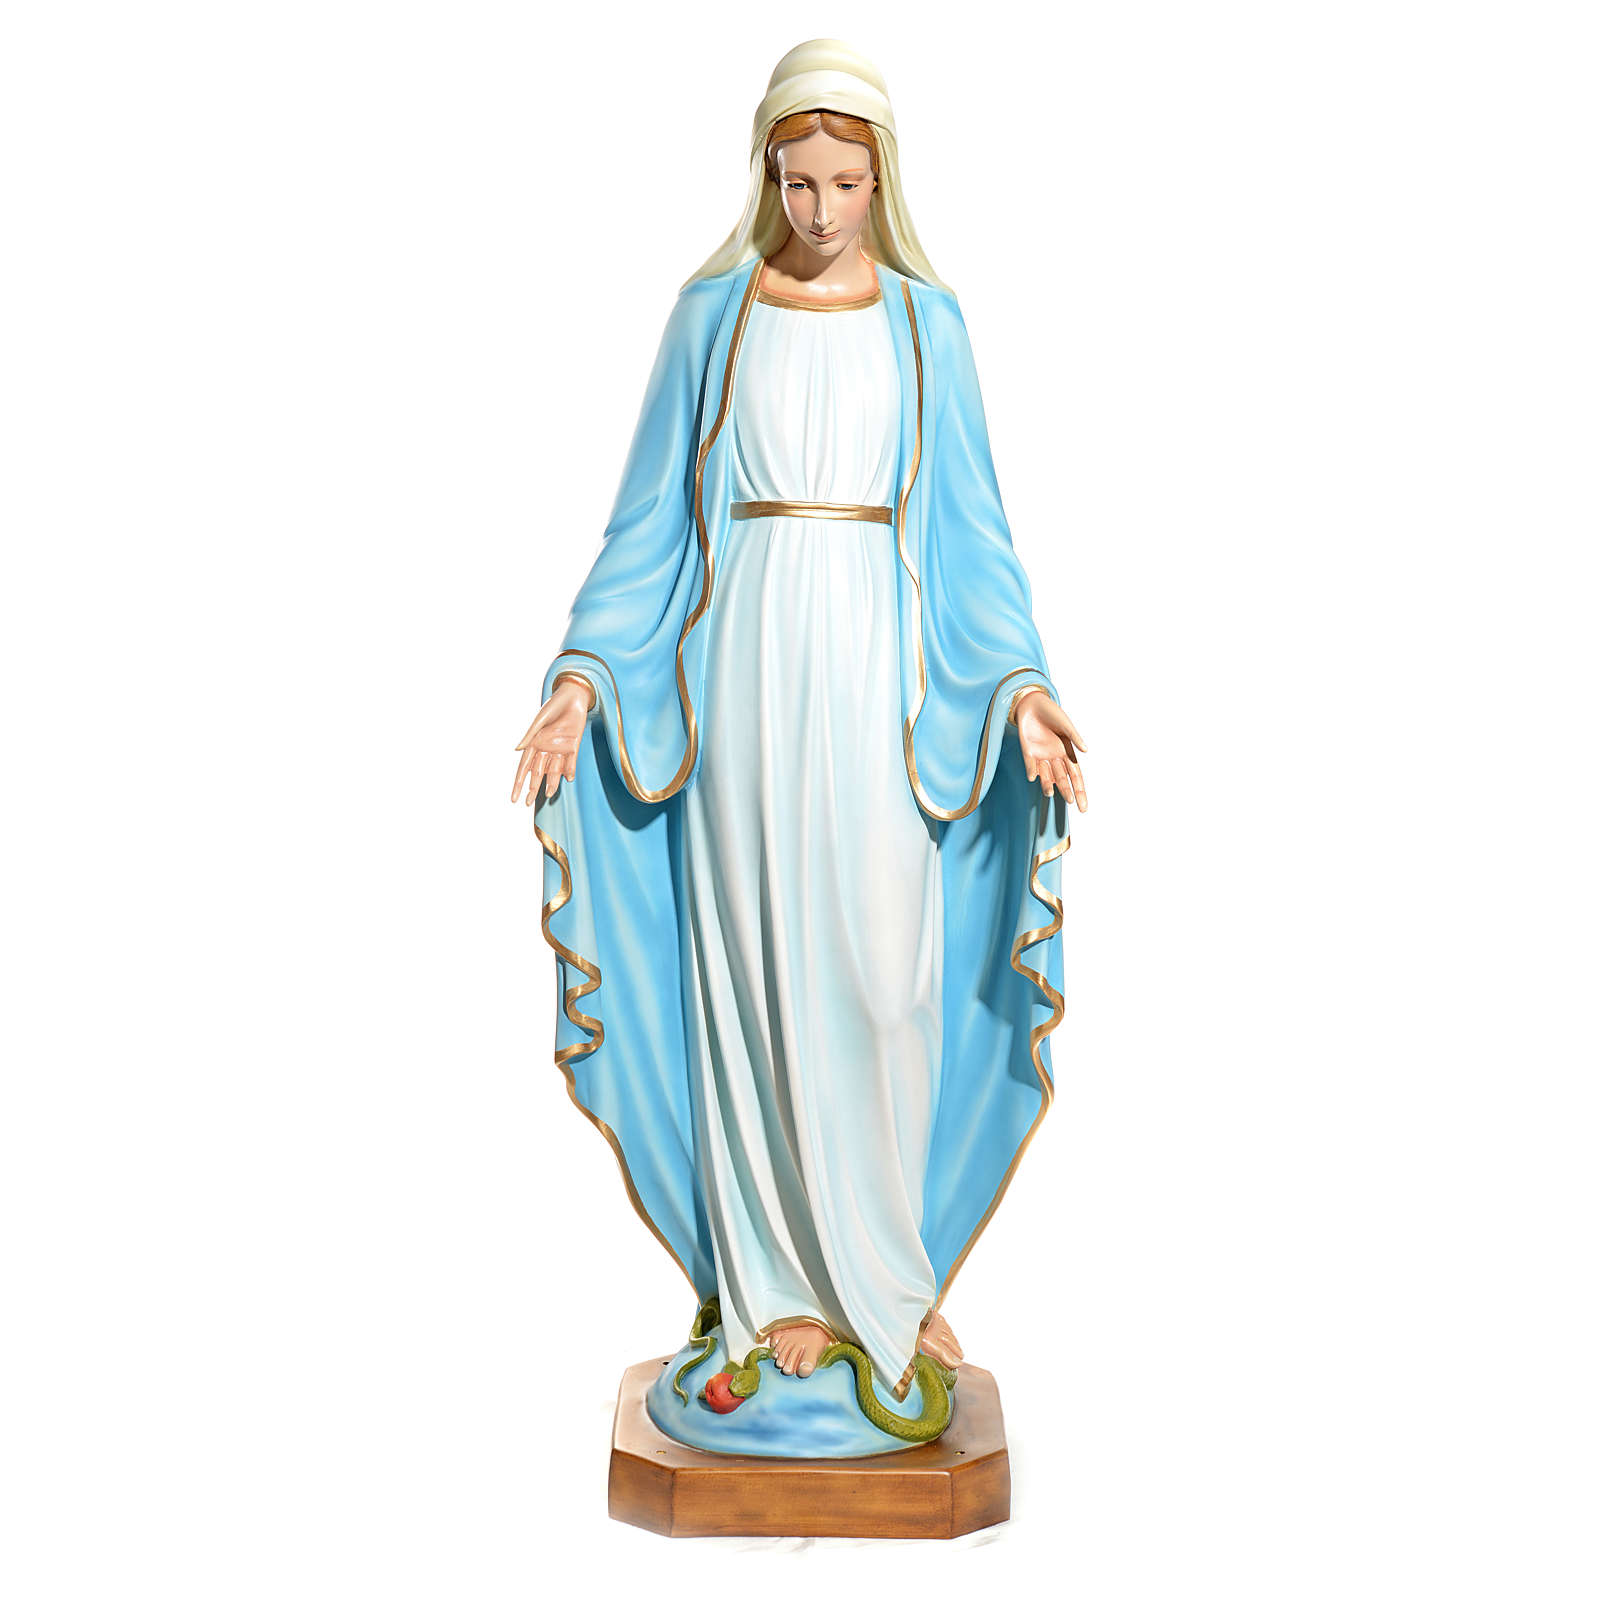 Immaculate Virgin Mary statue 145cm in fiberglass | online sales on